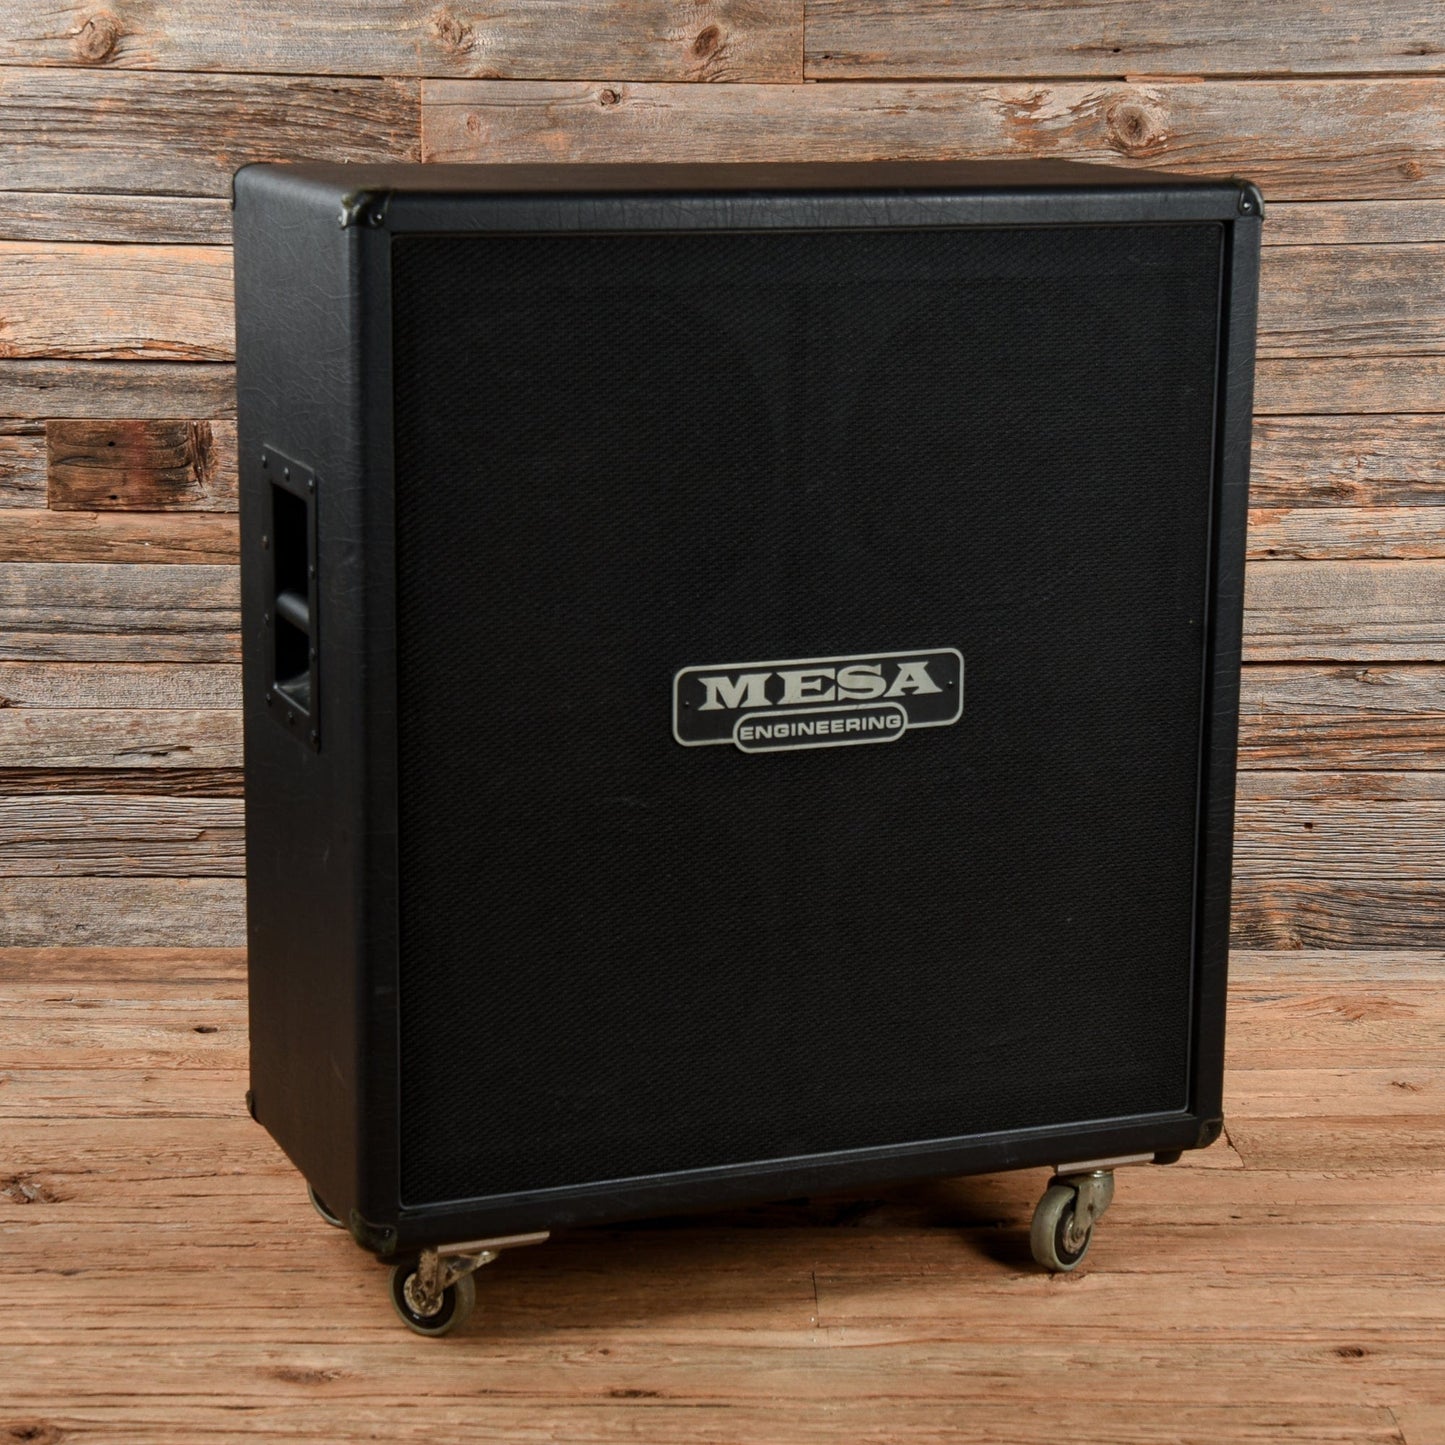 Mesa Boogie Oversized 4x12 Cabinet Amps / Guitar Cabinets